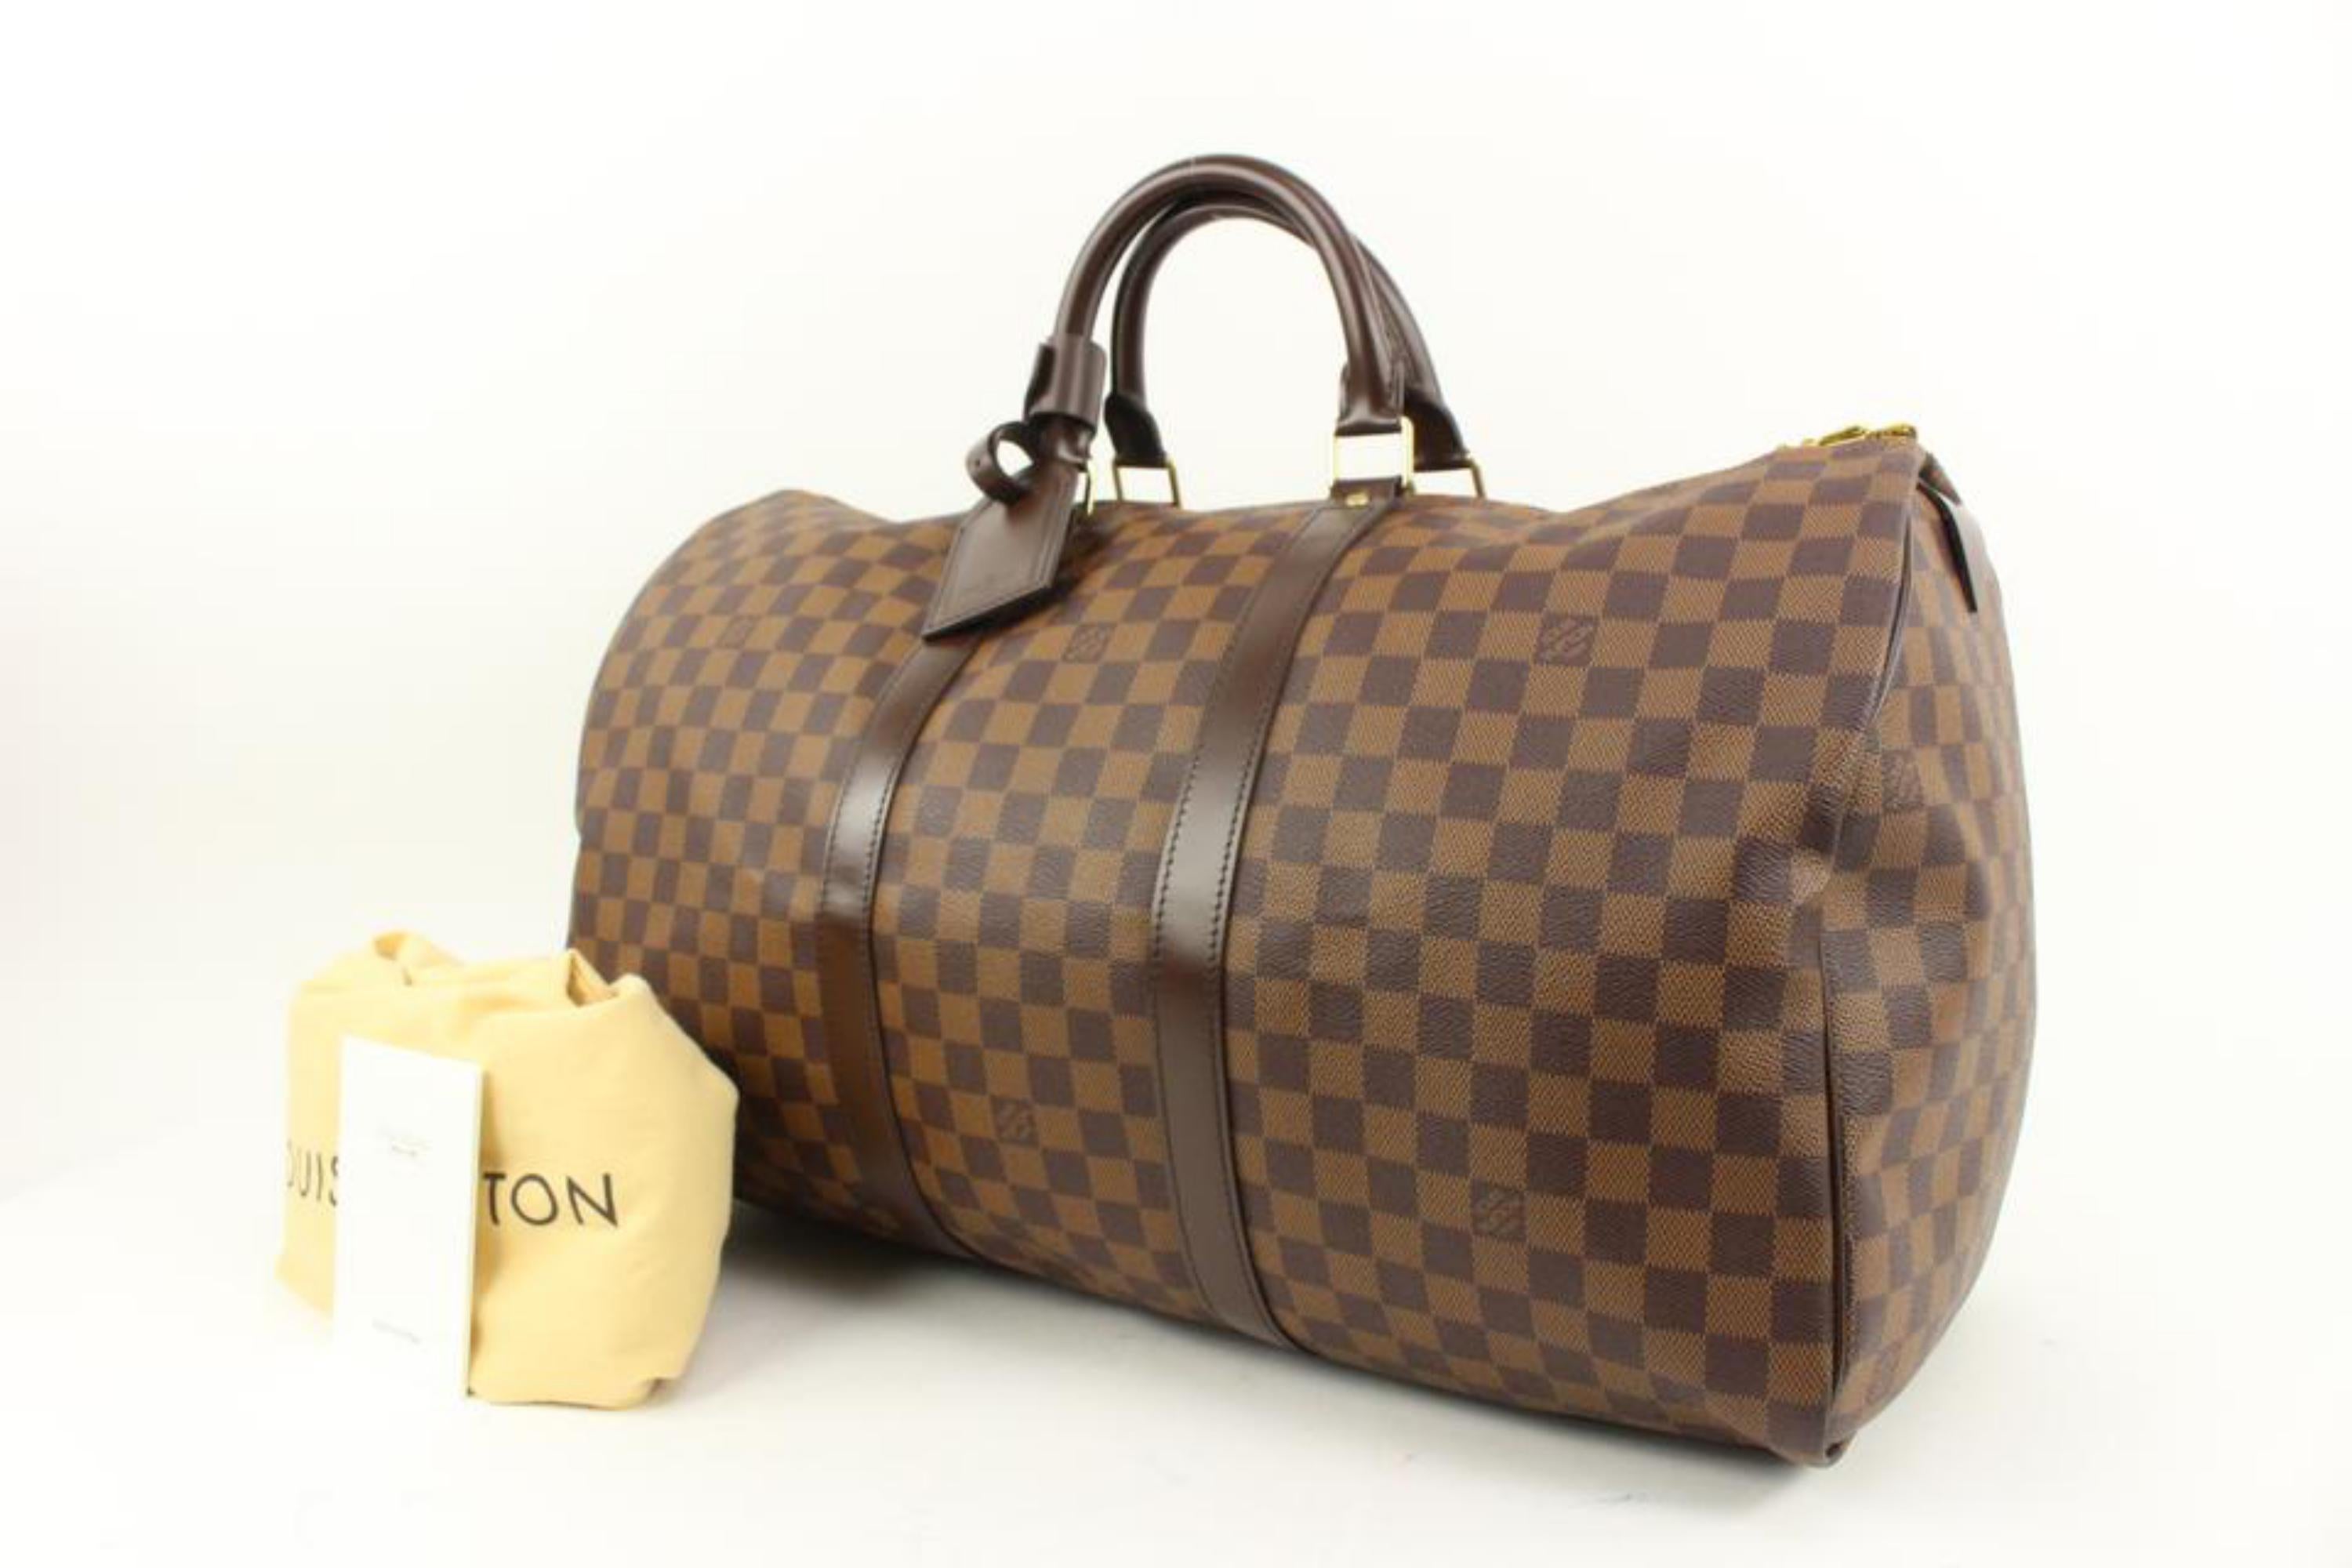 Louis Vuitton Damier Ebene Keepall 50 Duffle bag 82lv39s
Date Code/Serial Number: MB0057
Made In: France
Measurements: Length:  20